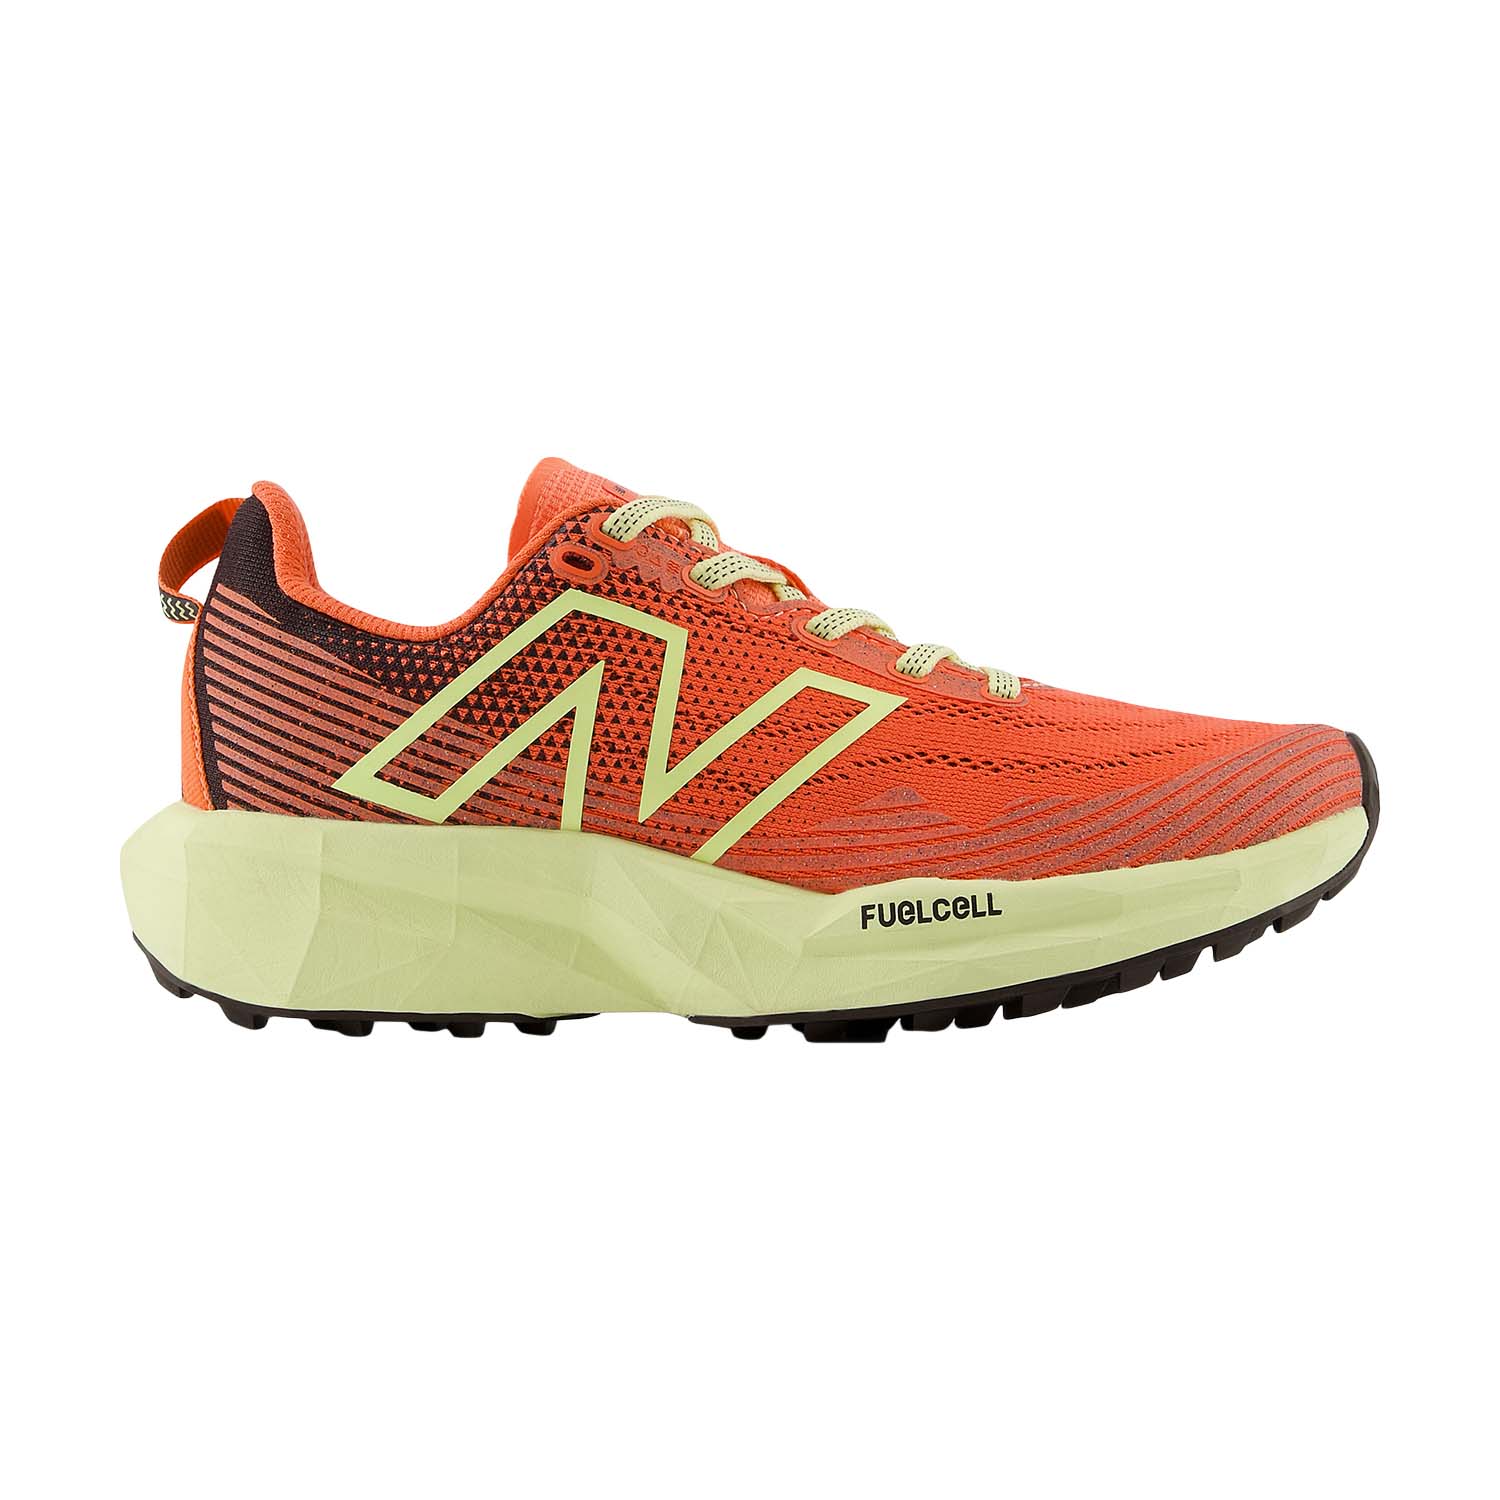 New Balance FuelCell Summit Unknown v5 - Gulf Red